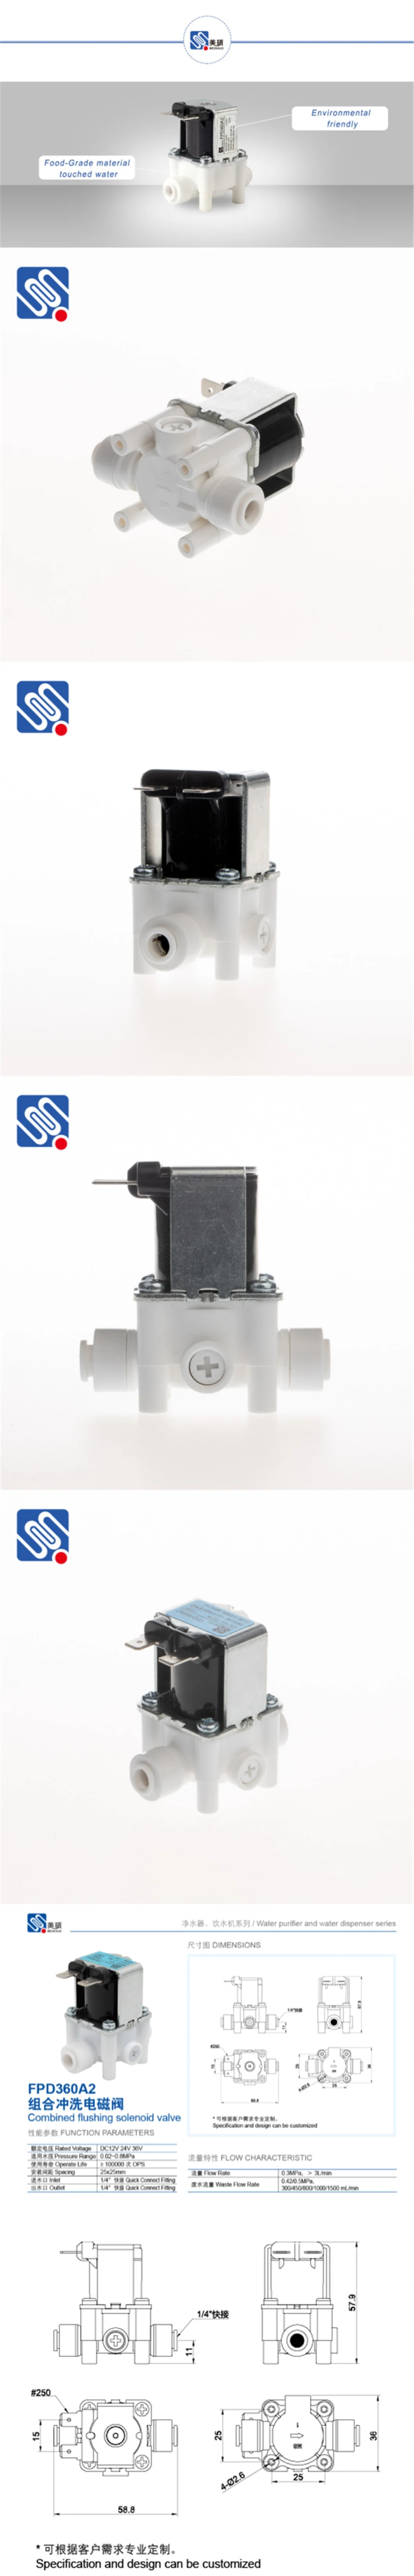 Meishuo Fpd360A2 One Way Normally Closed 24VDC 1/4 Inch 12V Miniature Mini PP Combined Flushing Plastic Solenoid Valve